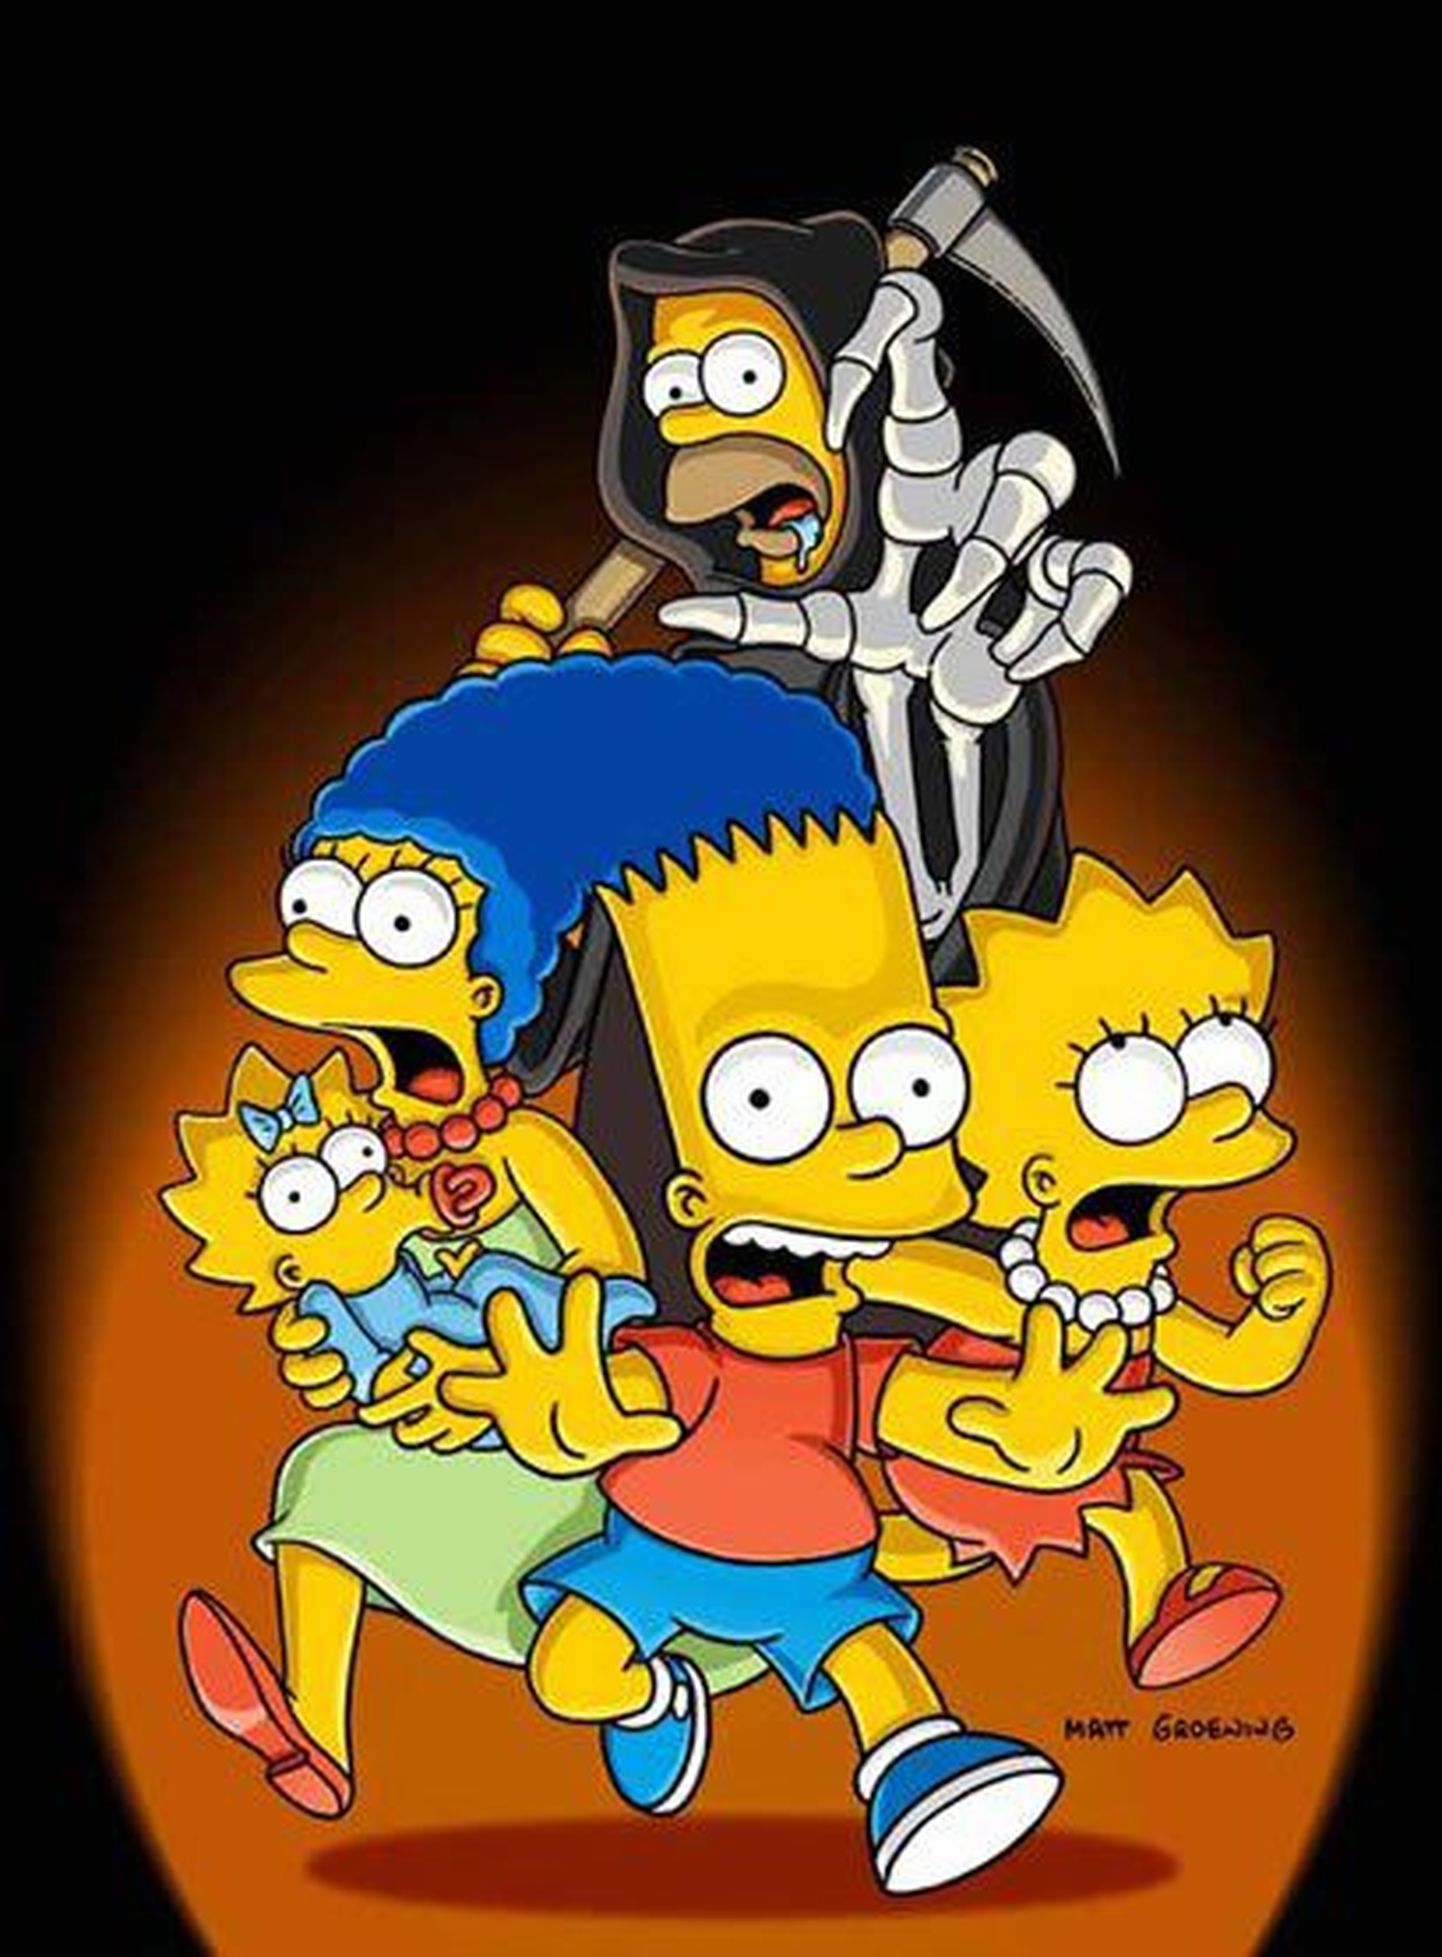 The Simpsons: Treehouse of Horror XIV